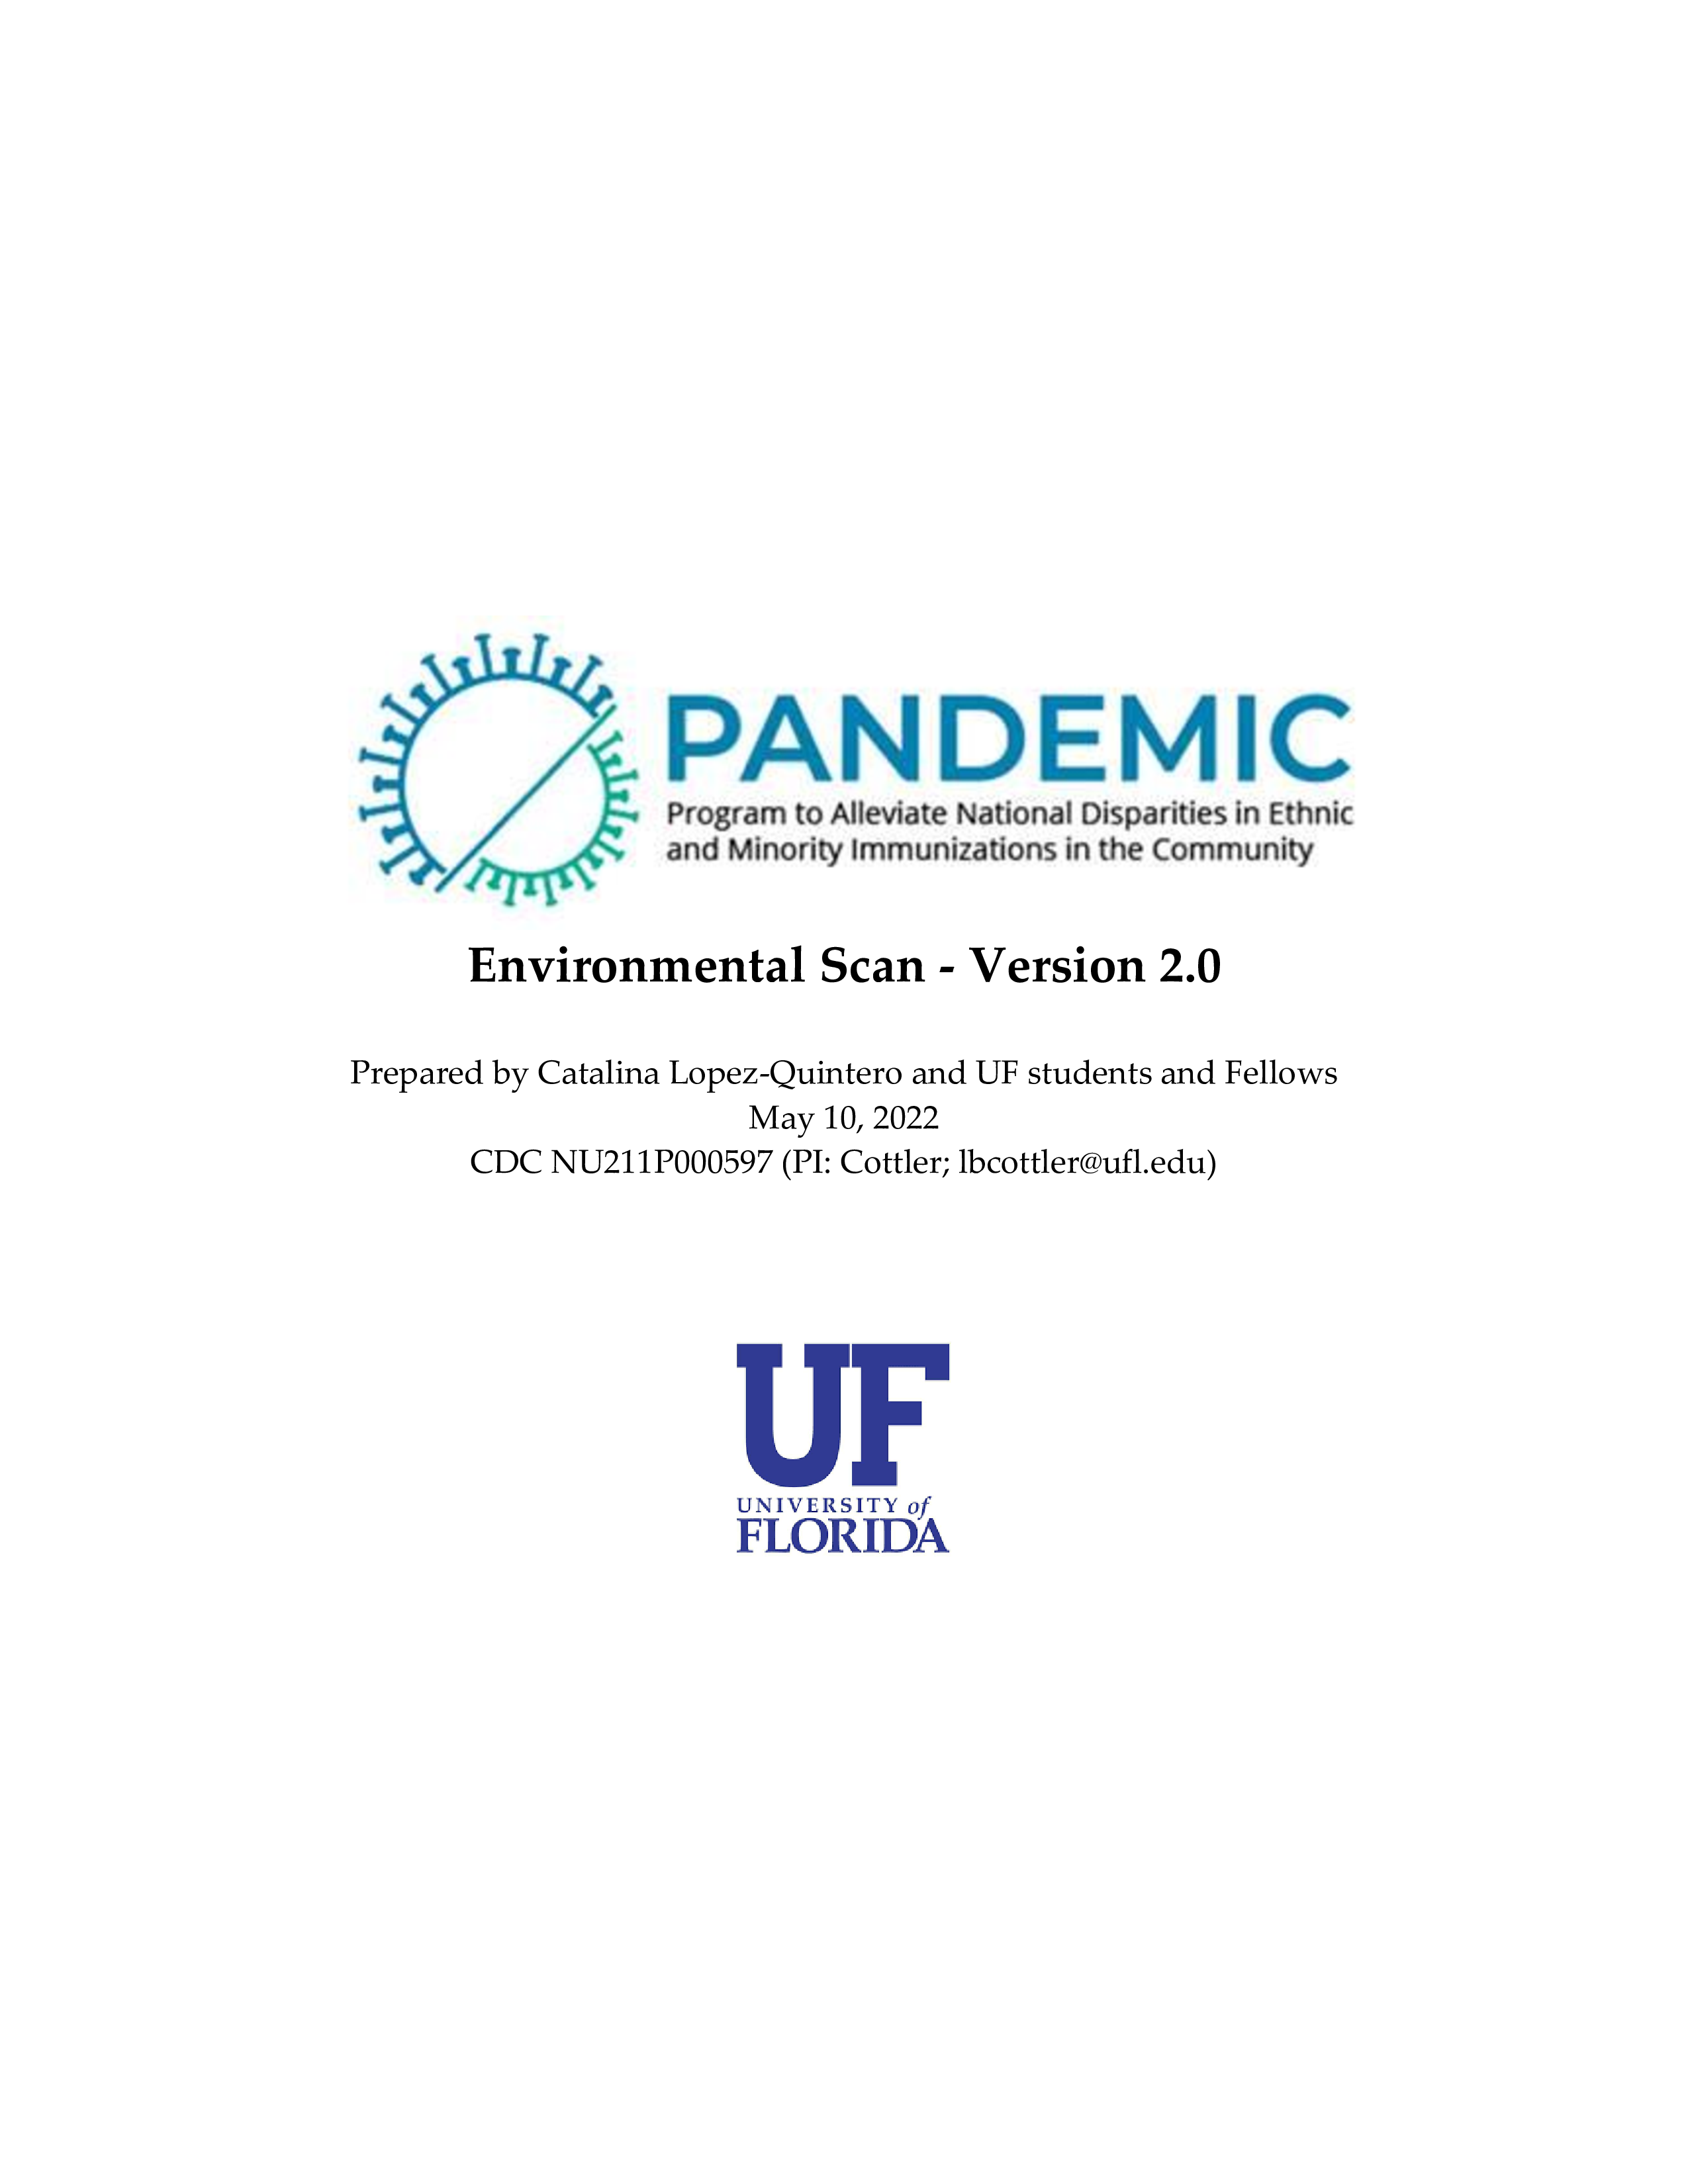 PANDEMIC - Program to Alleviate National Disparities in Ethnic and Minority Immunizations in the Community cover page